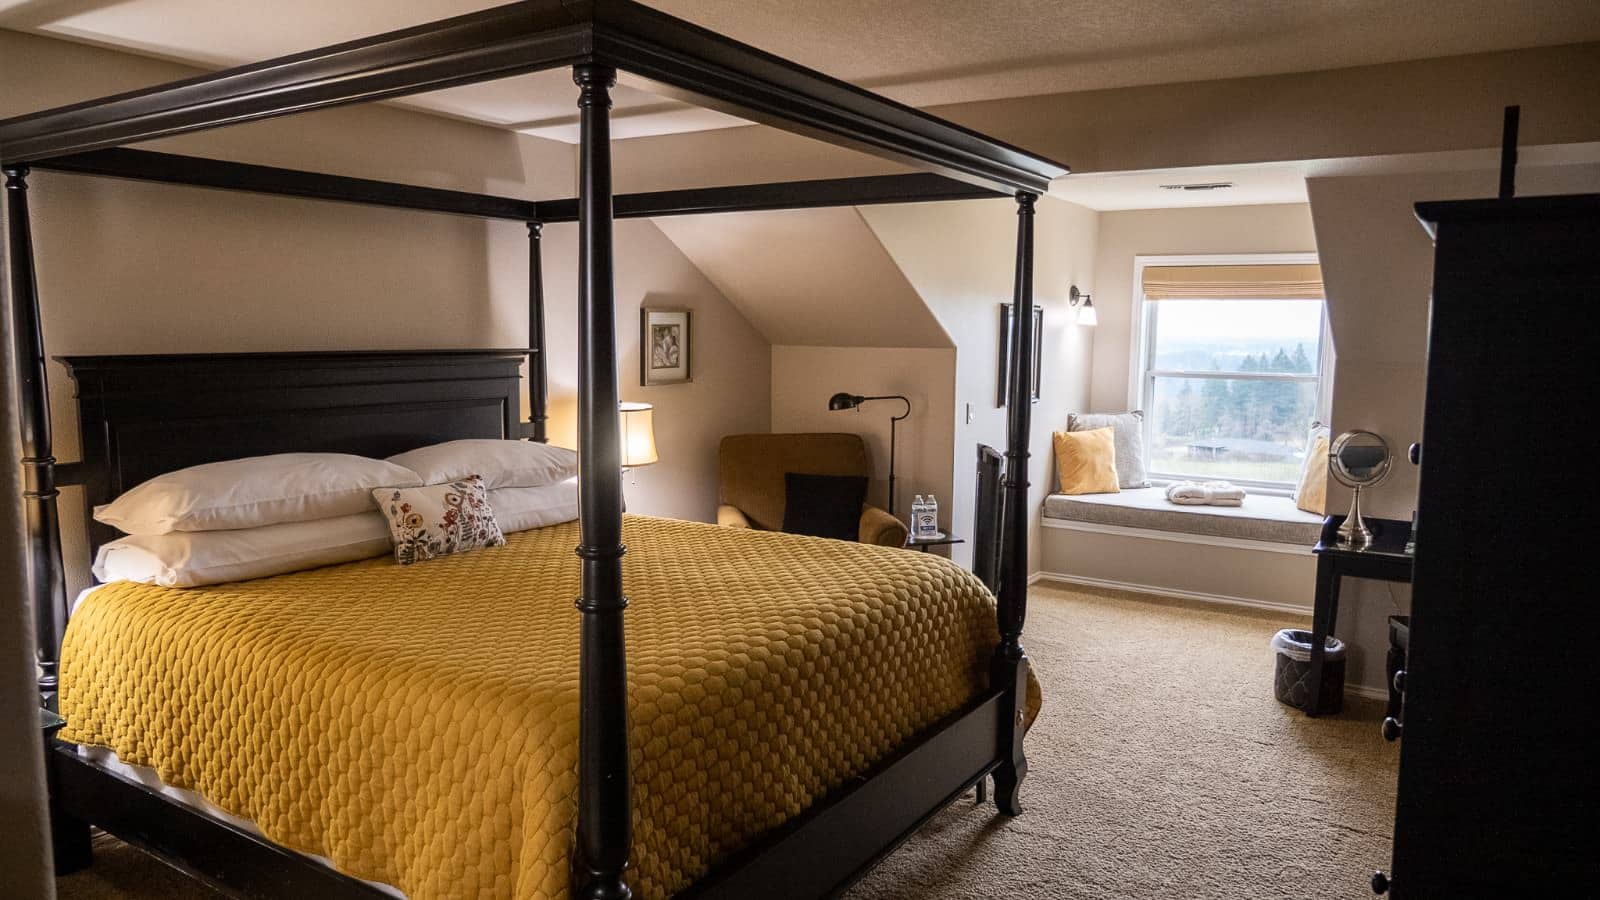 Bedroom with light tan walls, carpeting, dark wooden four poster bed with white pillows and mustard comforter, dark wooden dresser, and nook with views of the outside